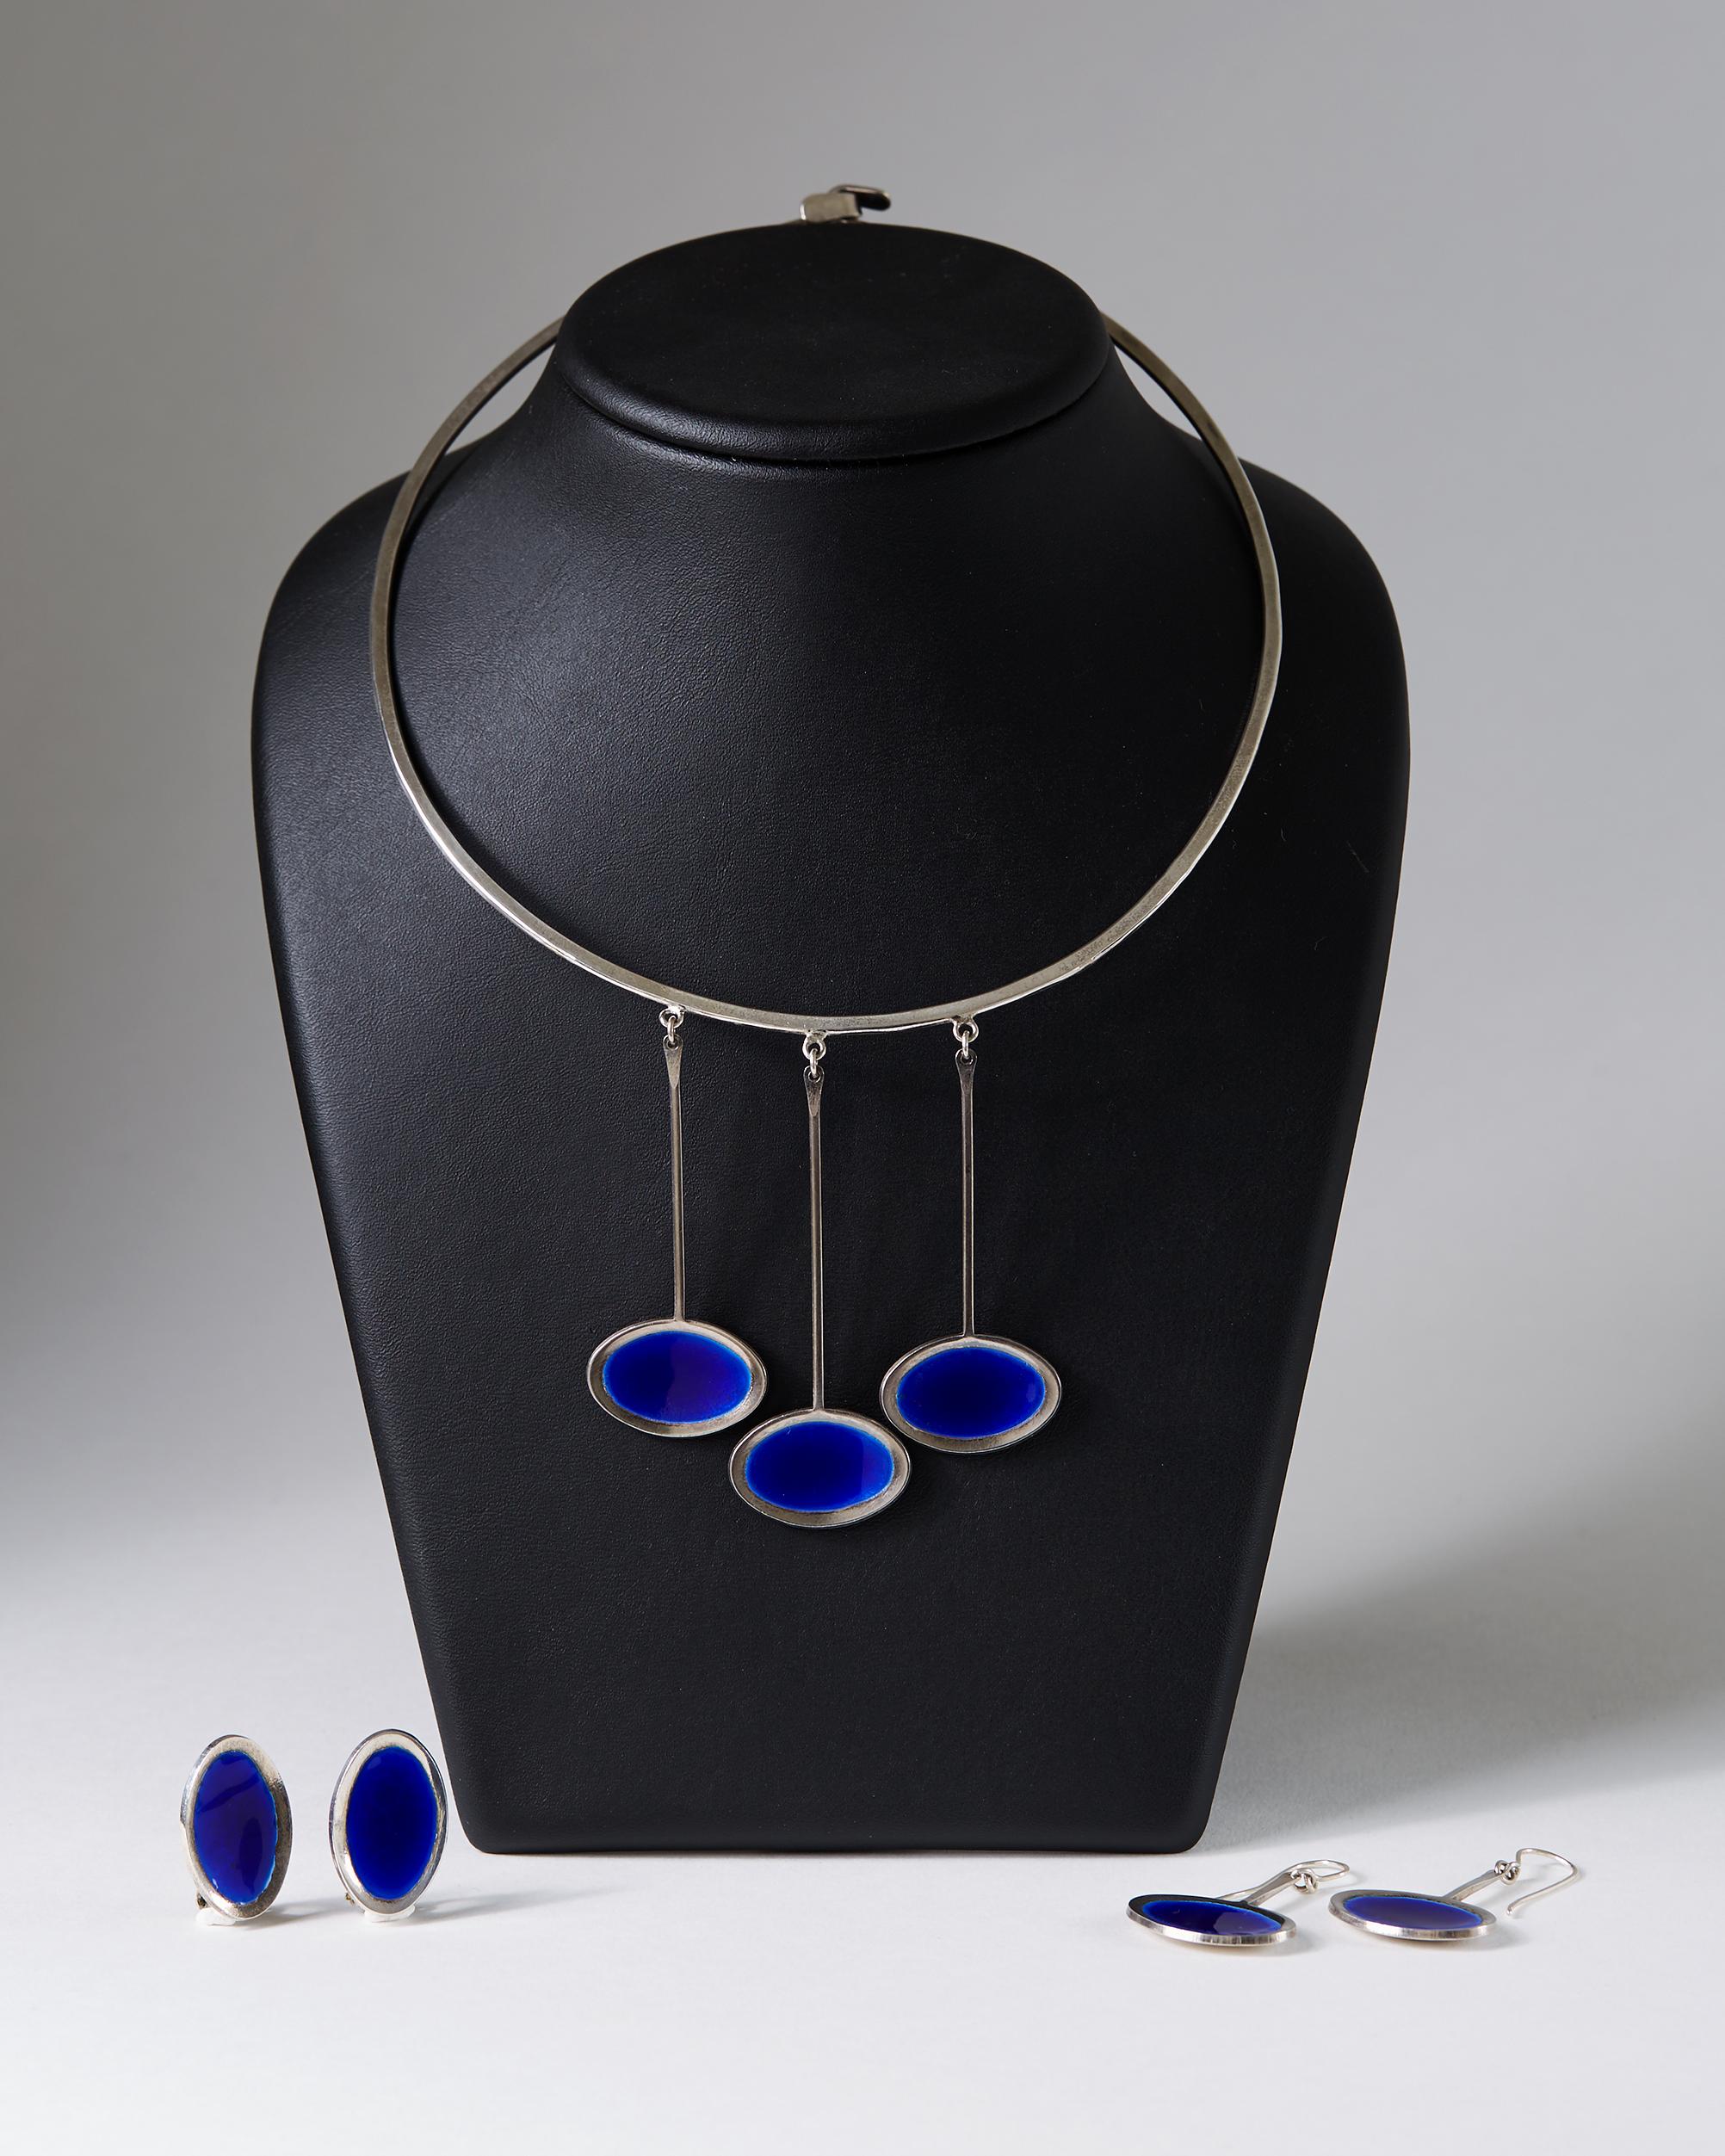 Norway. 1960's.
Sterling silver and enamel.